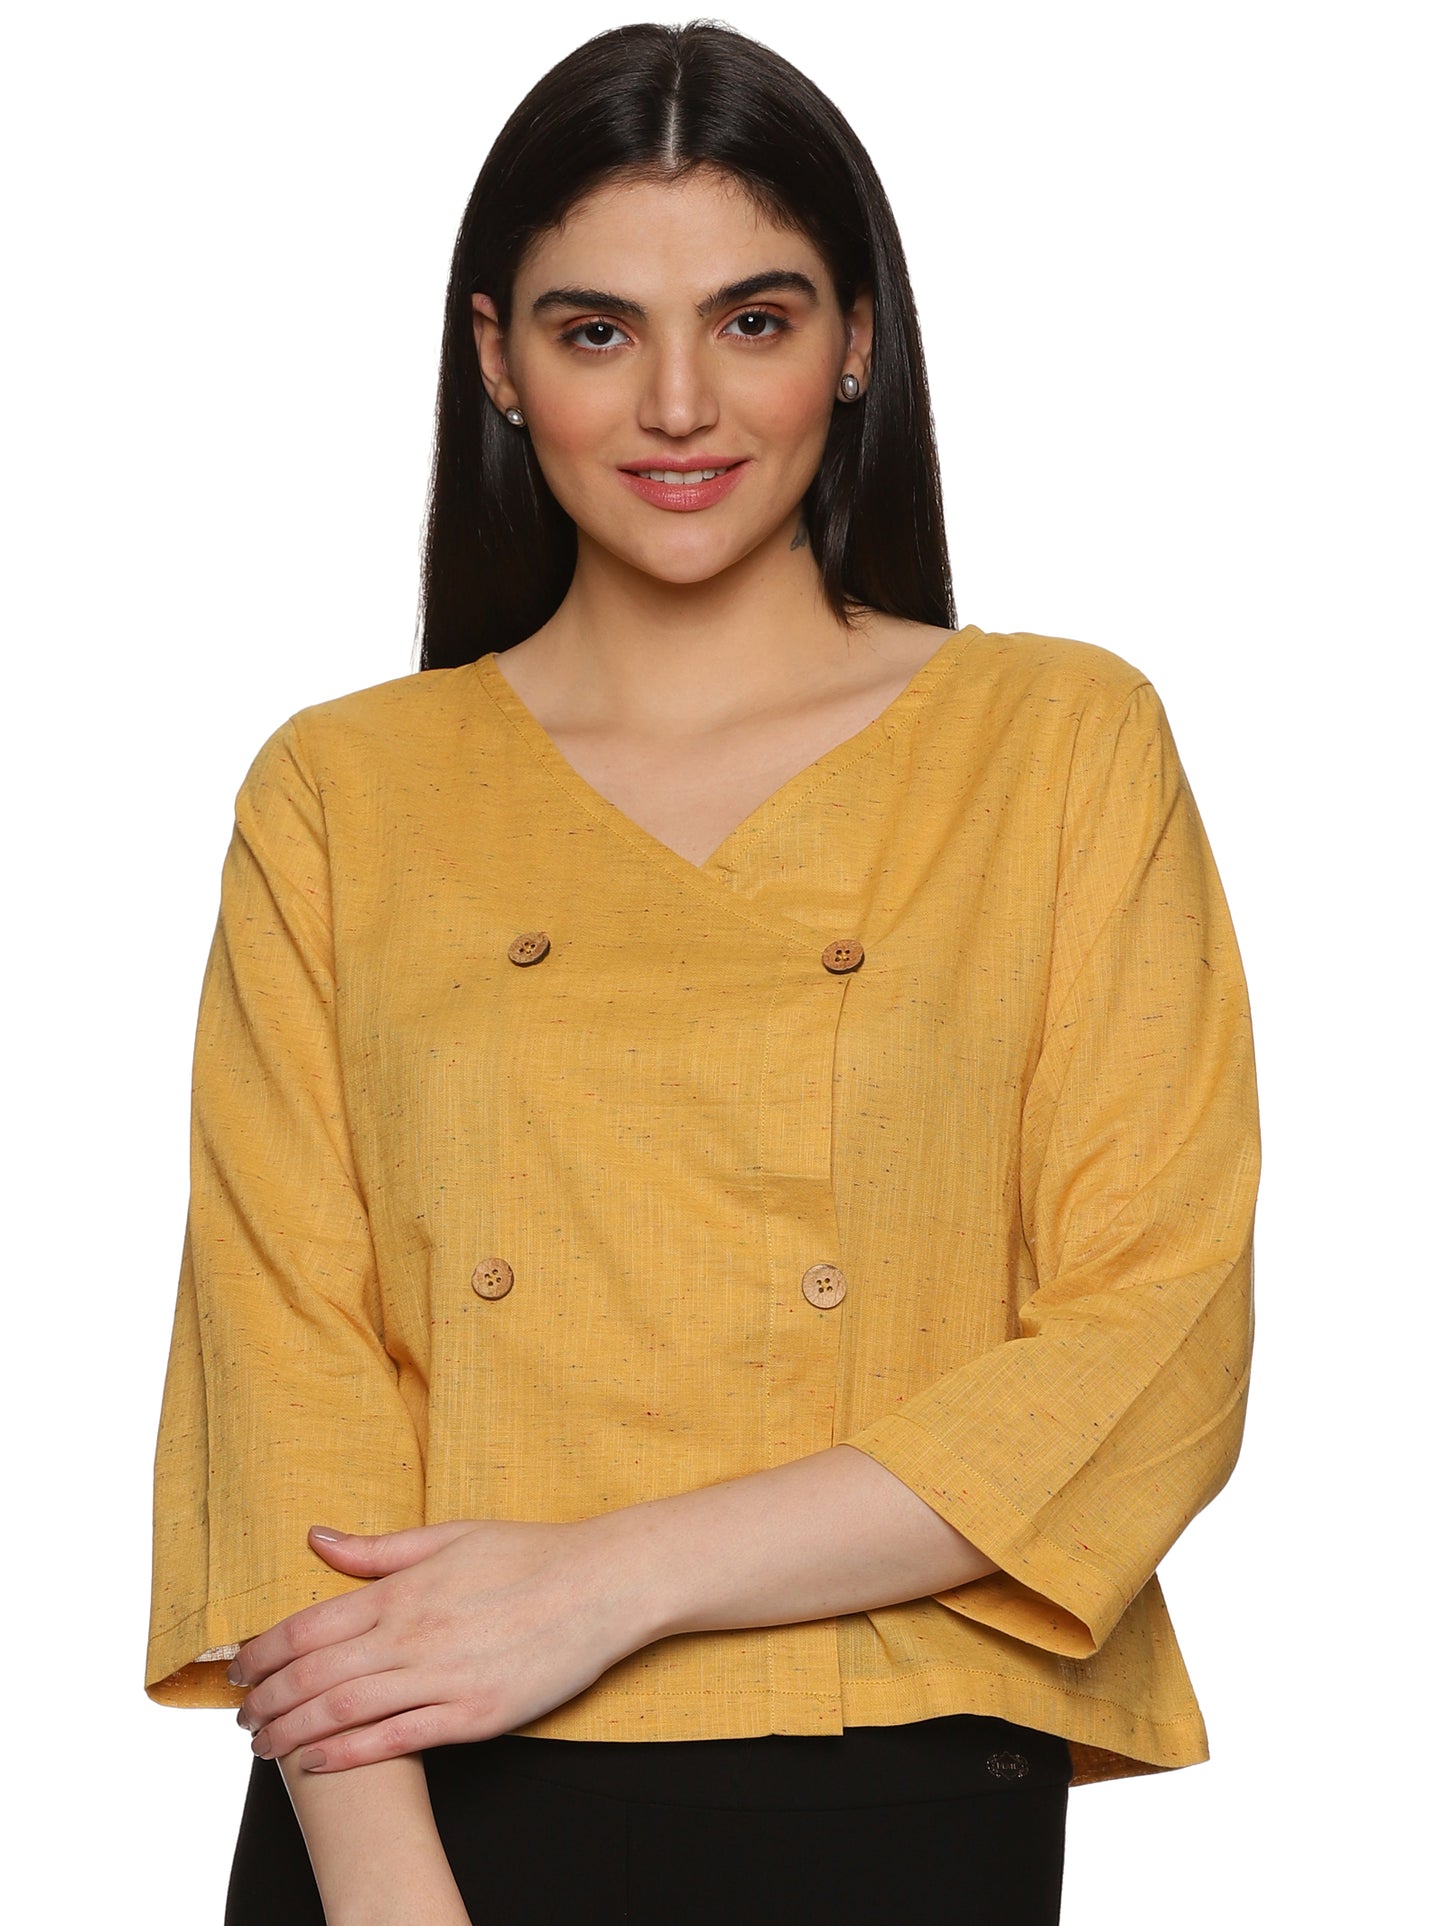 A model in Mustard Asymmetric Neck Side Button Top, a womens workwear is standing against a white background